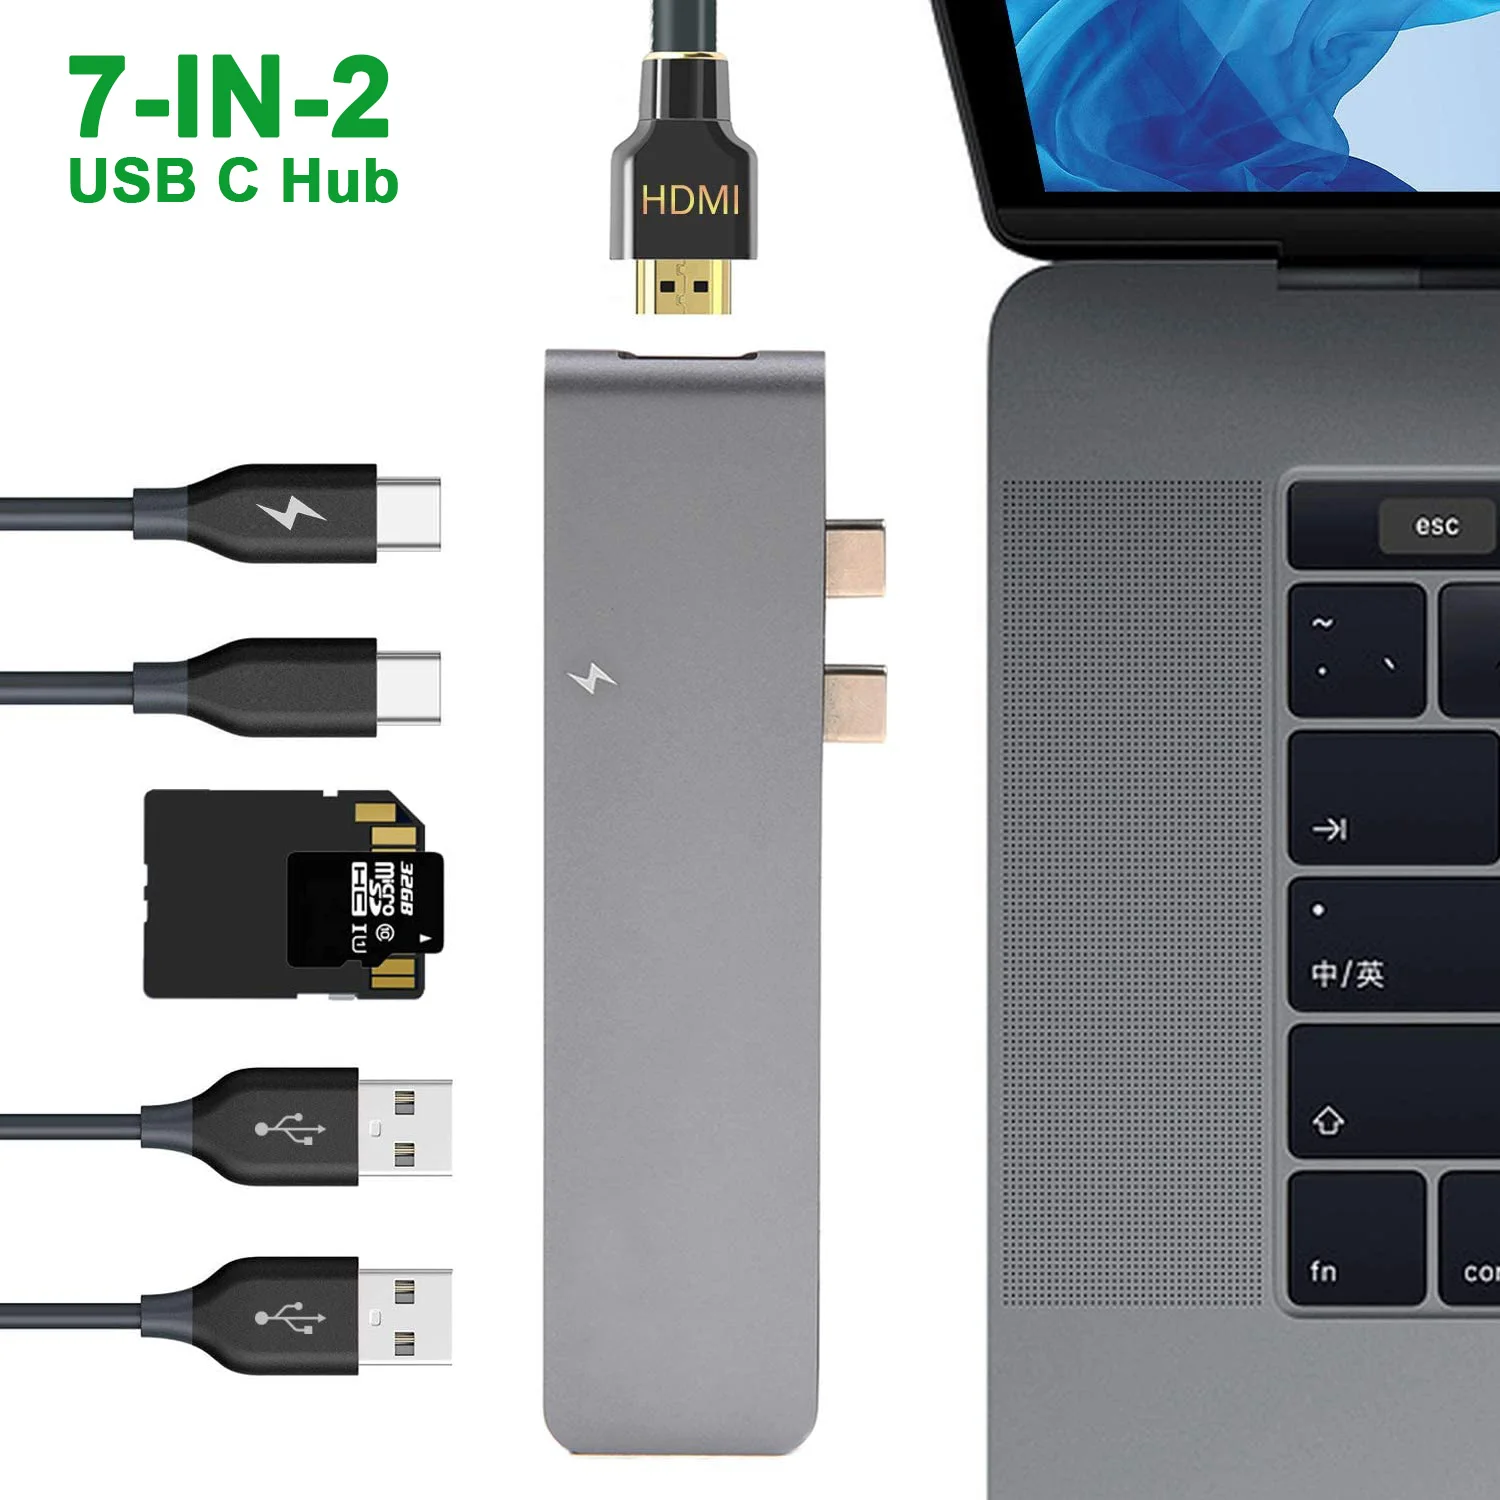 USB C Hub Thunderbolt 3 Docking Station with 4K HDMI Daul Type C TF/SD Reader PD Charging for MacBook Pro/Air M1 Usb Adapter Hub